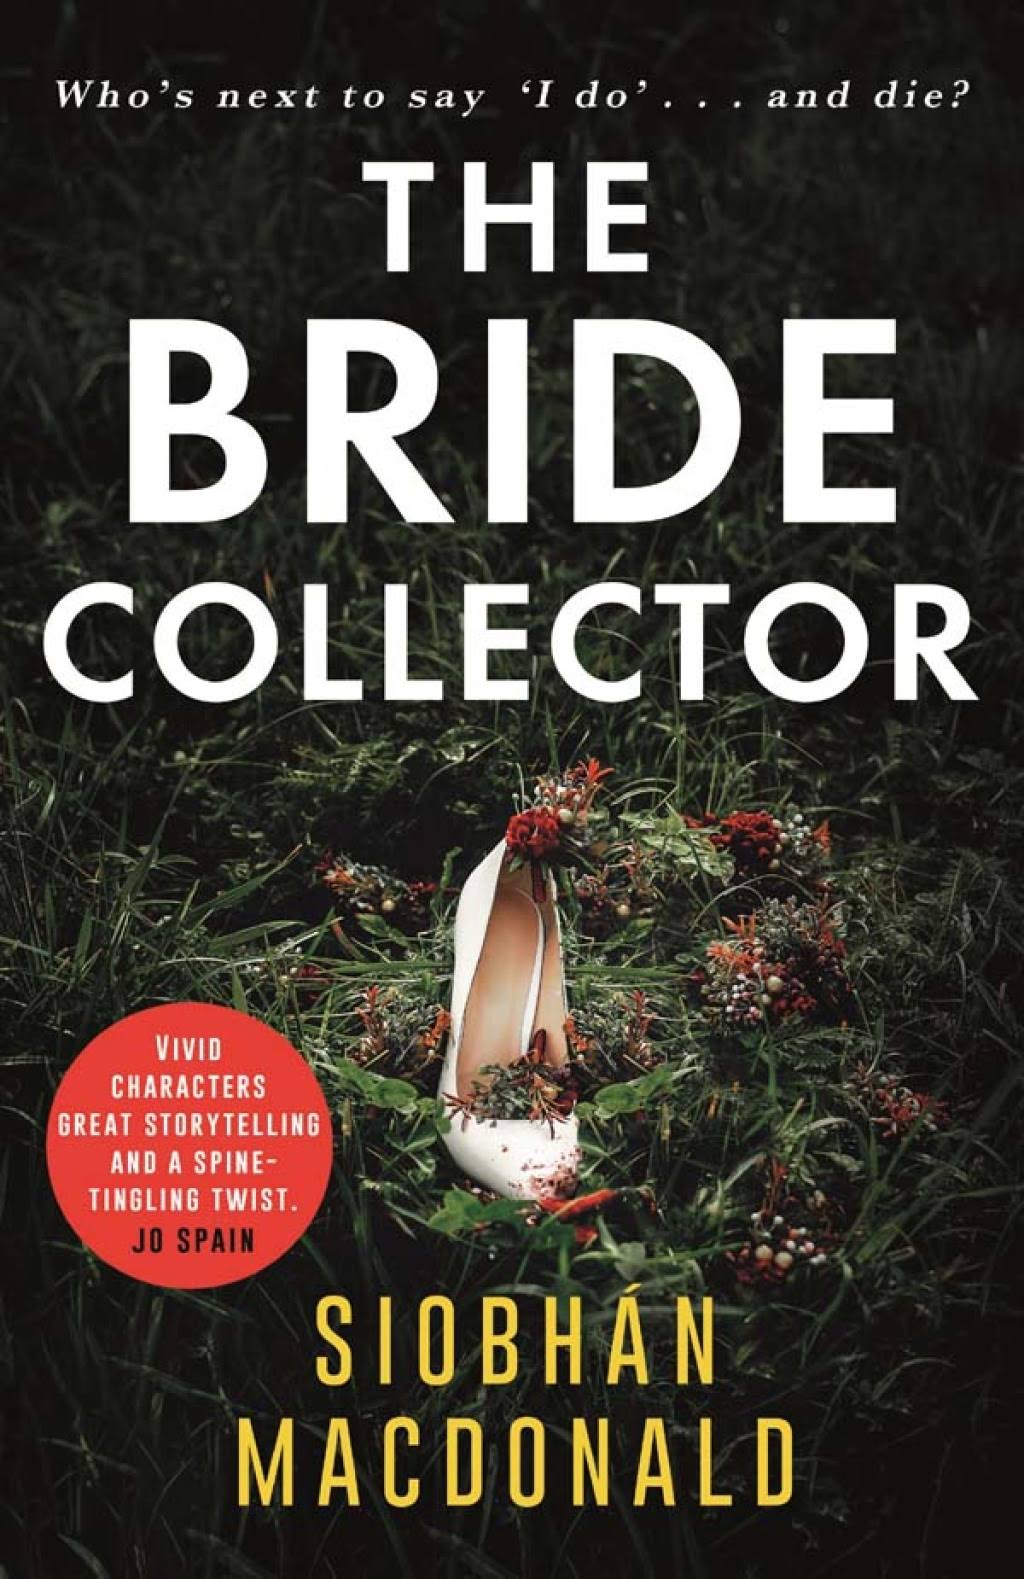 The Bride Collector by Siobhan Macdonald